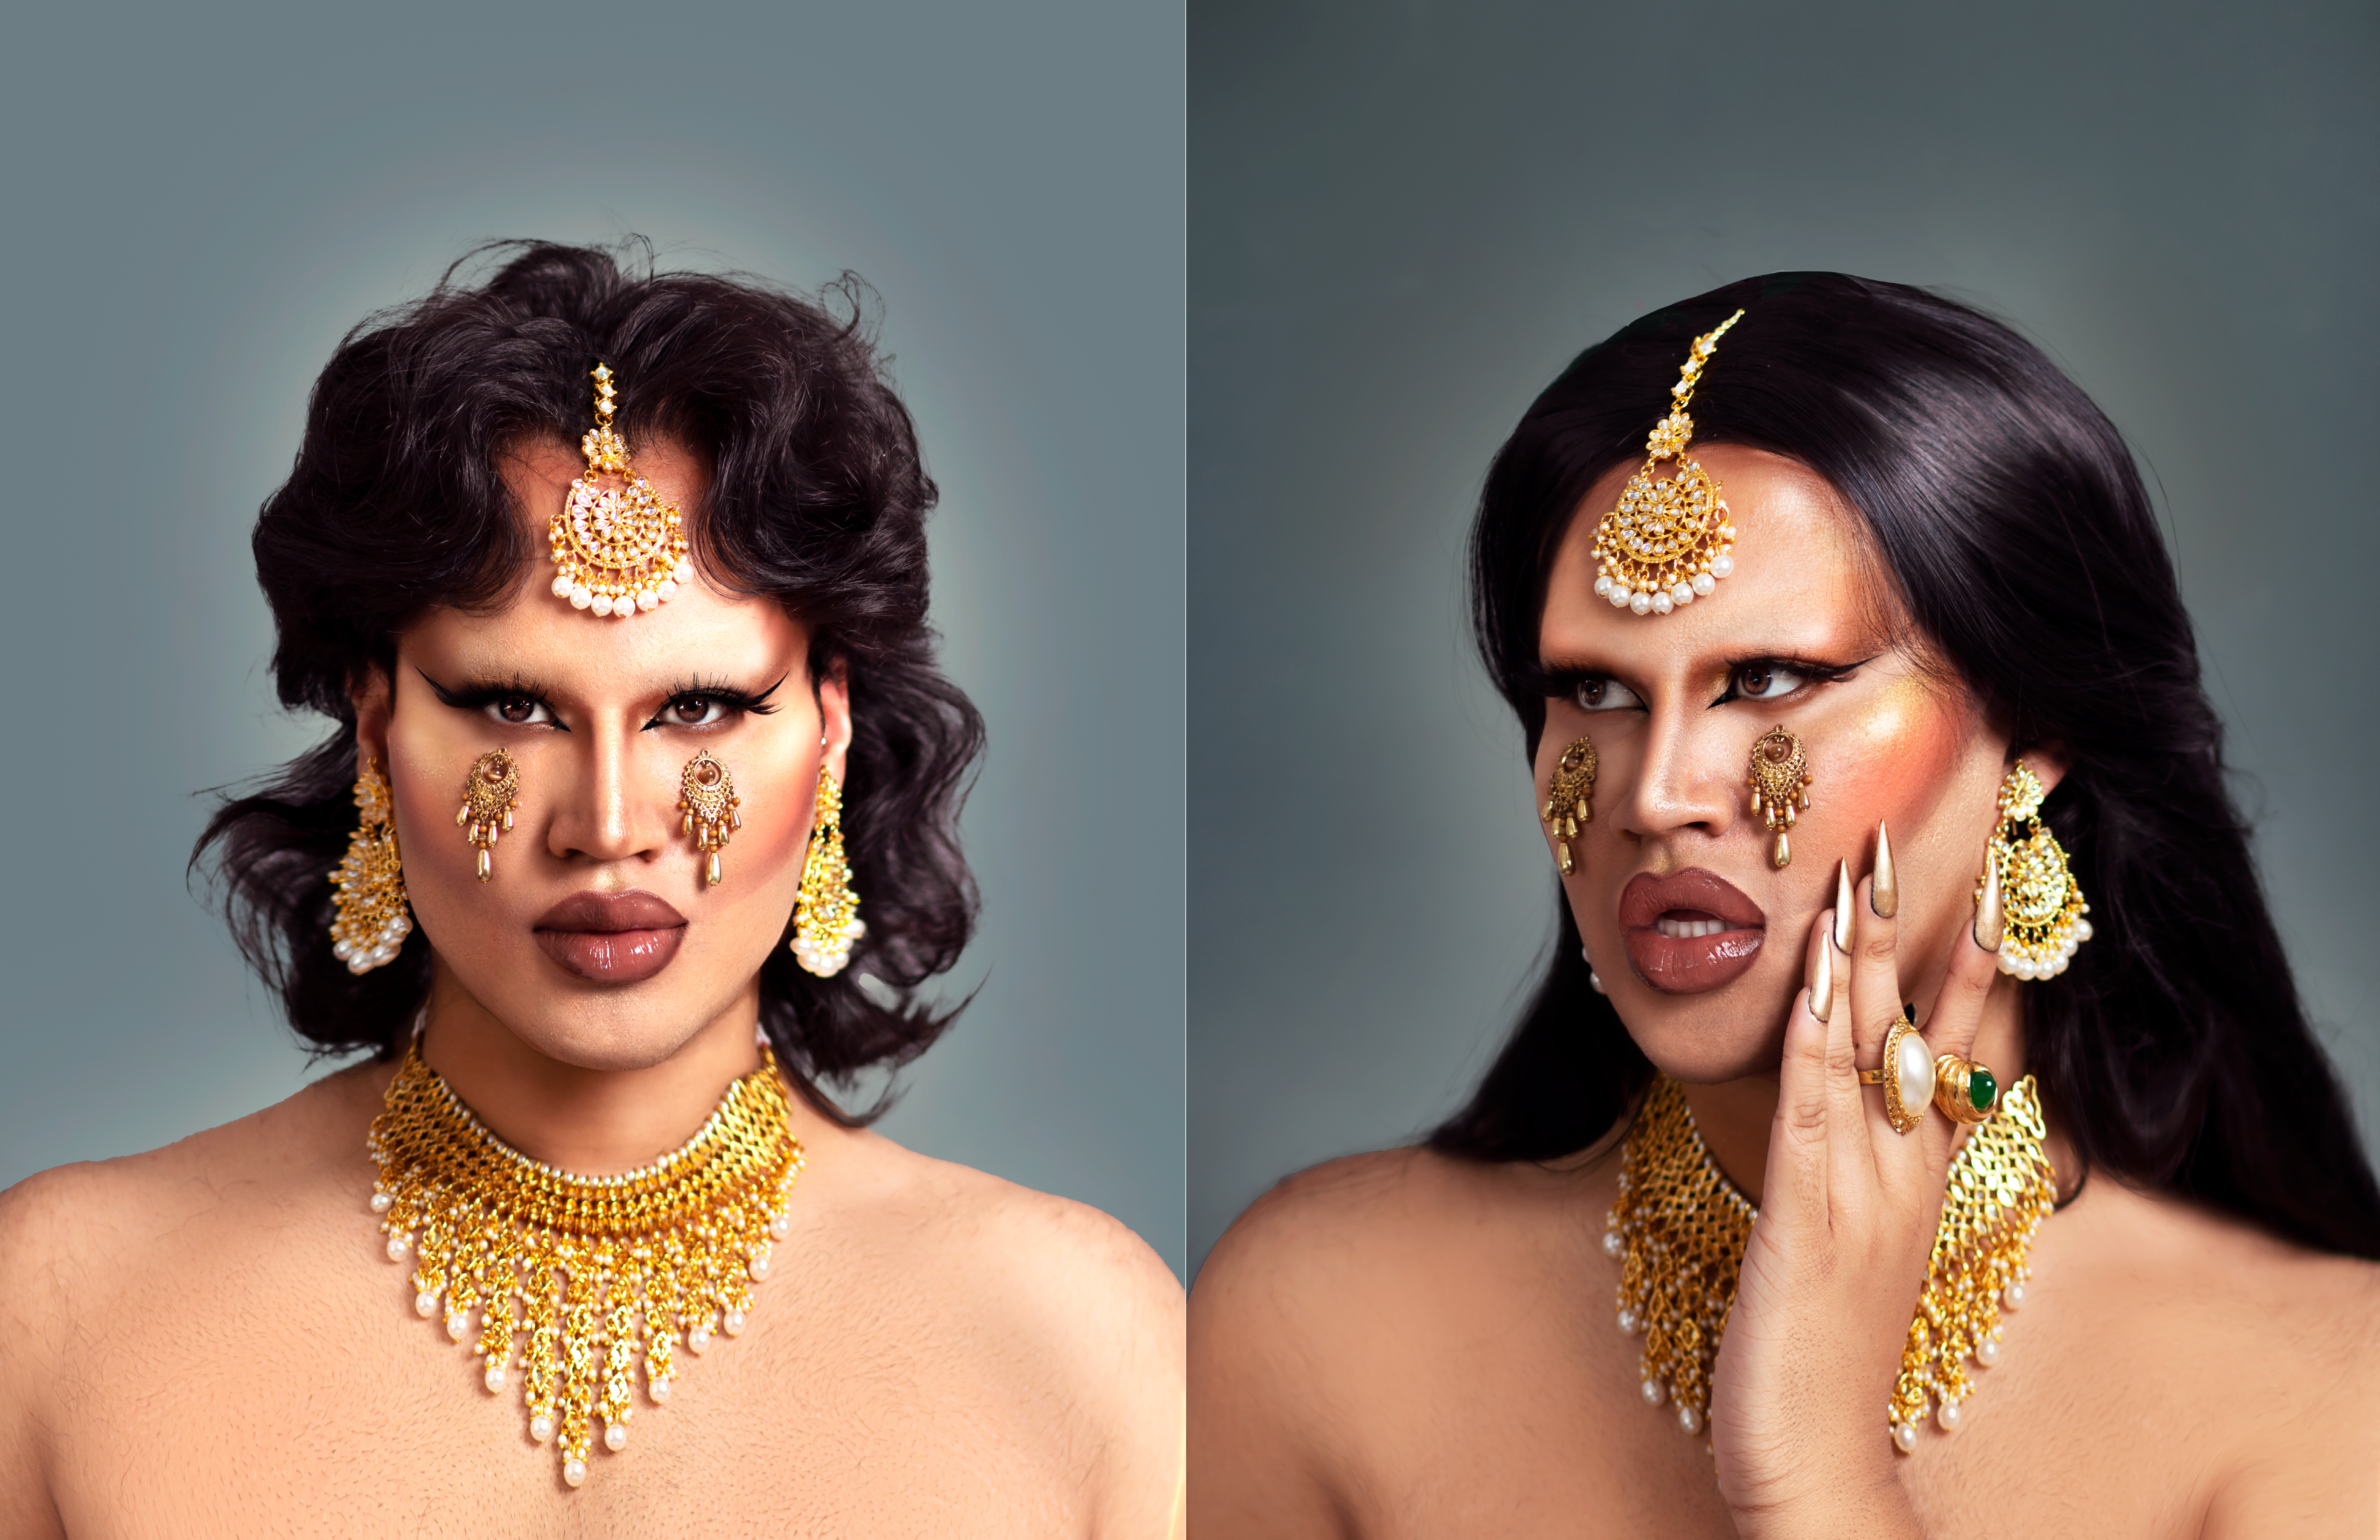 Depicted here is the Divine feminine, queering South Asian beauty standards by exaggerating them on a male form